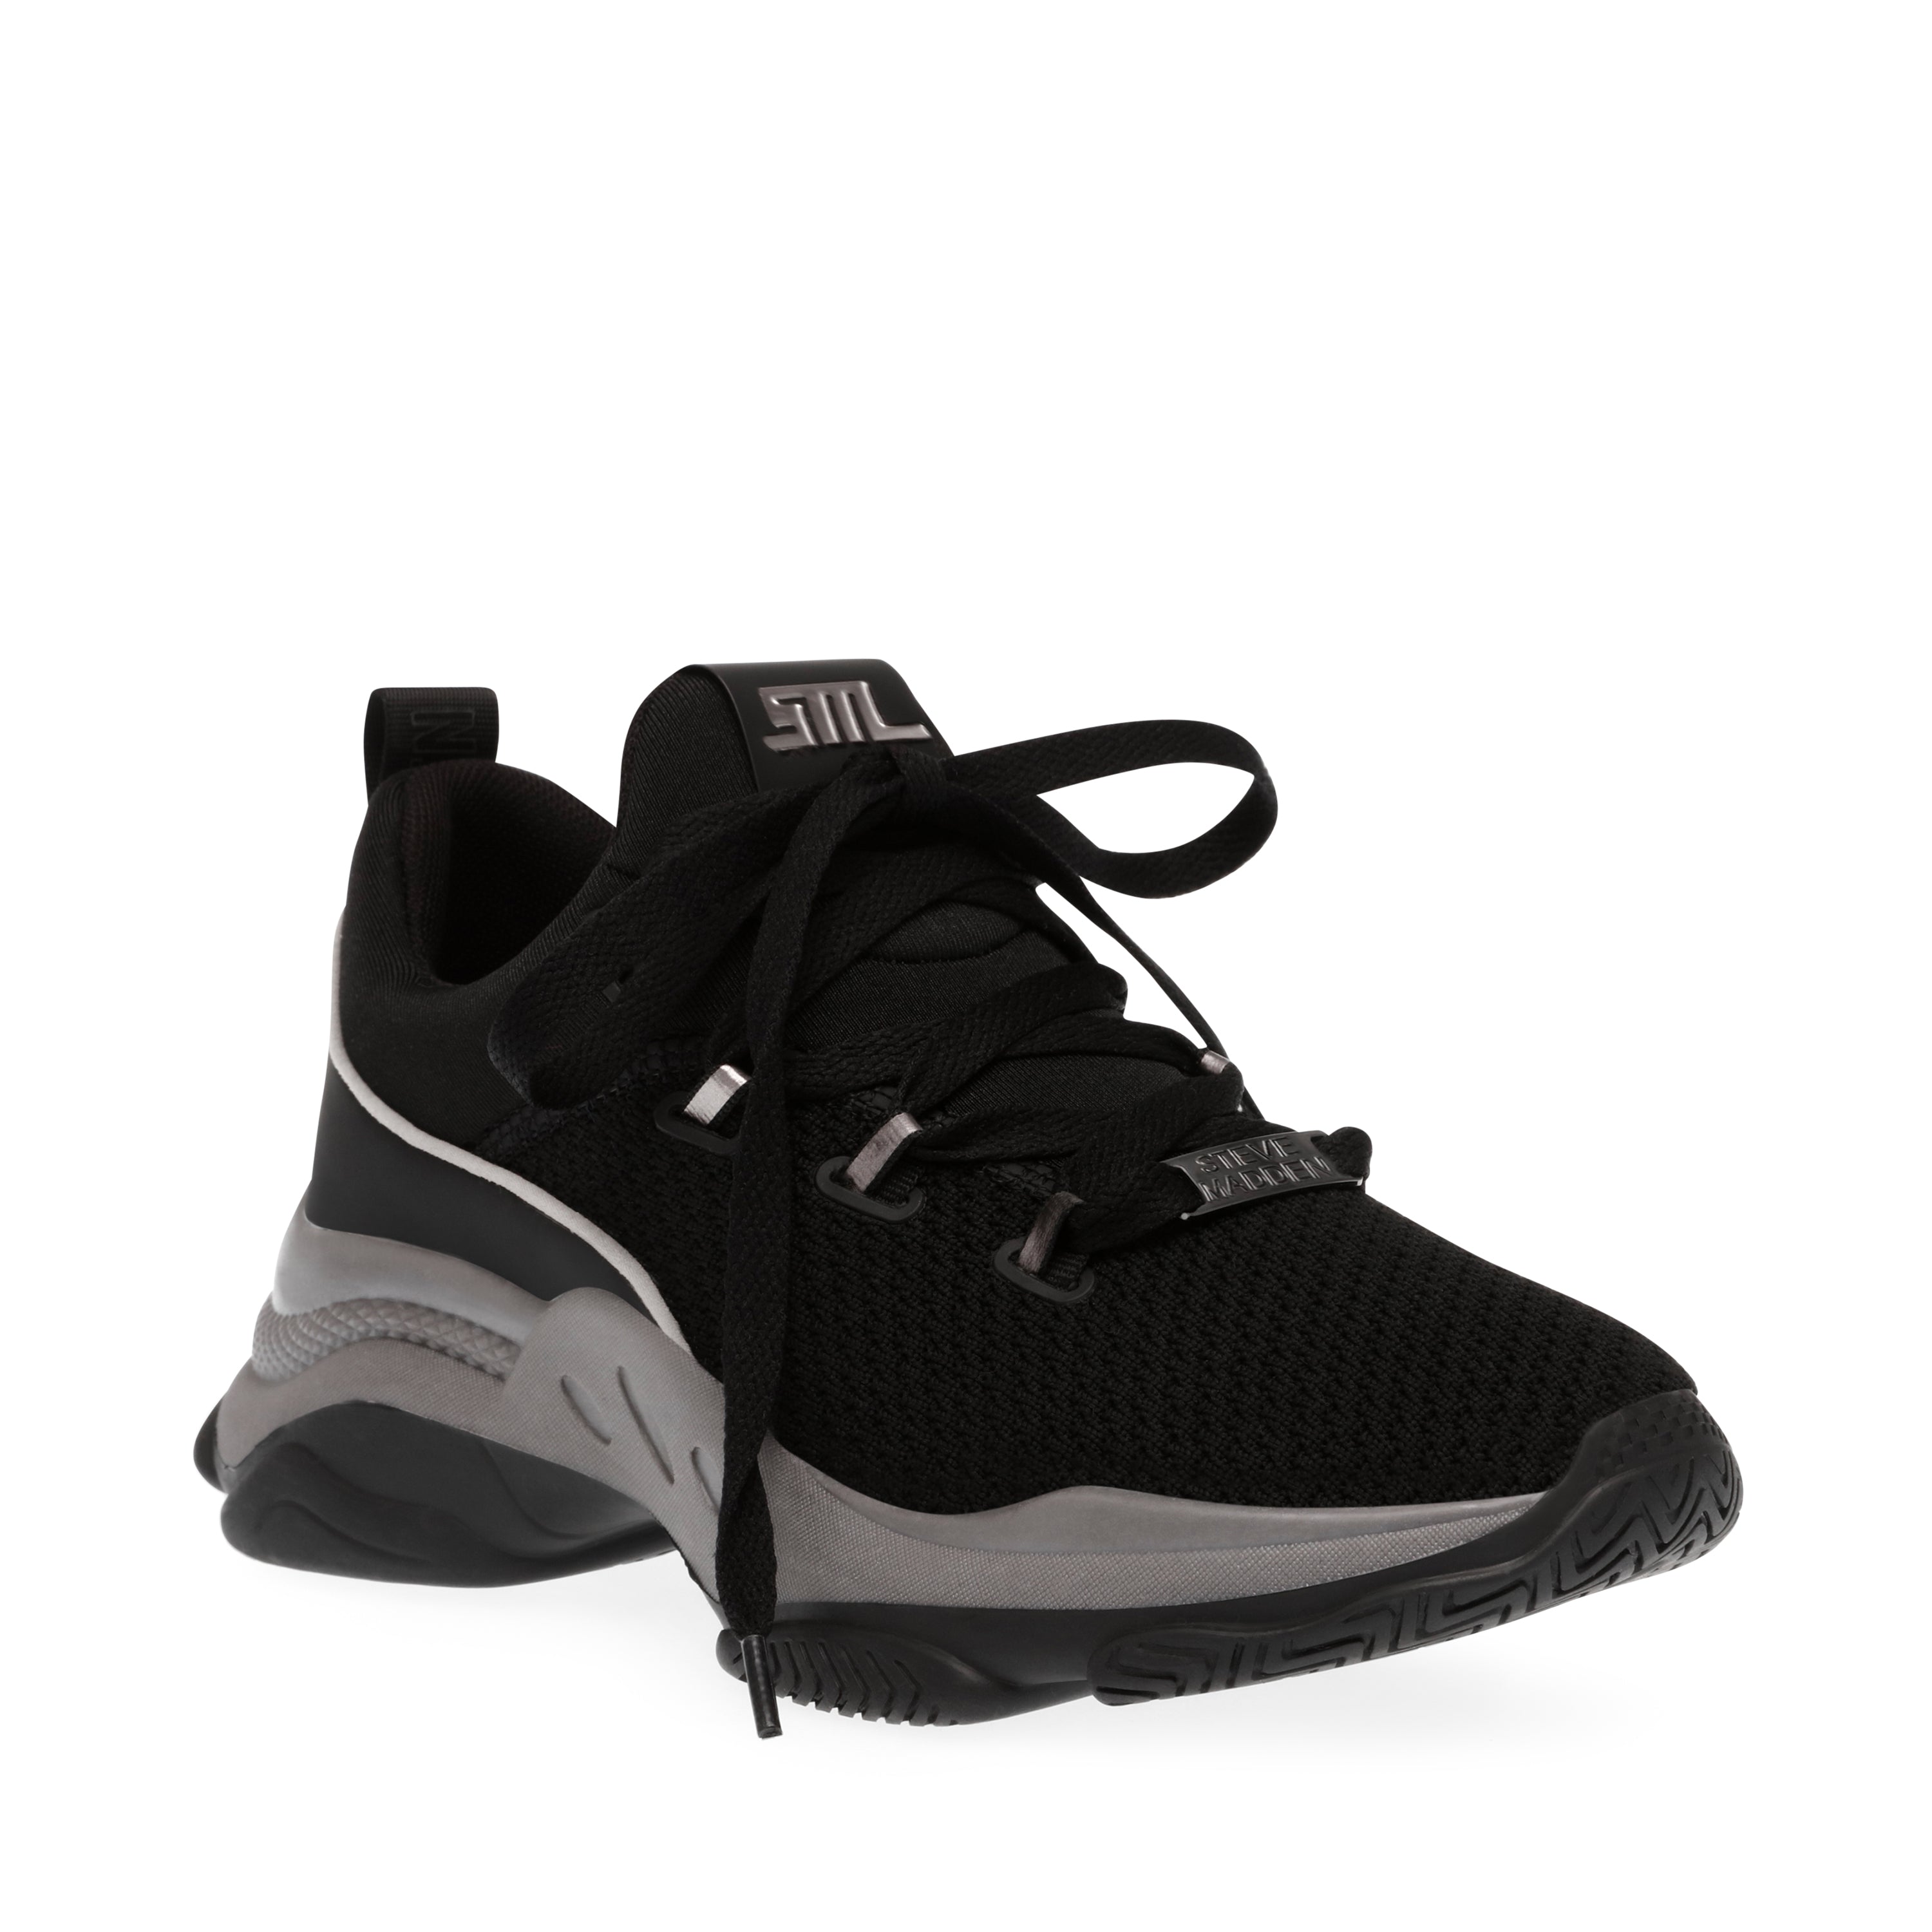 MATADOR BLACK/PEWTER SNEAKERS- Hover Image